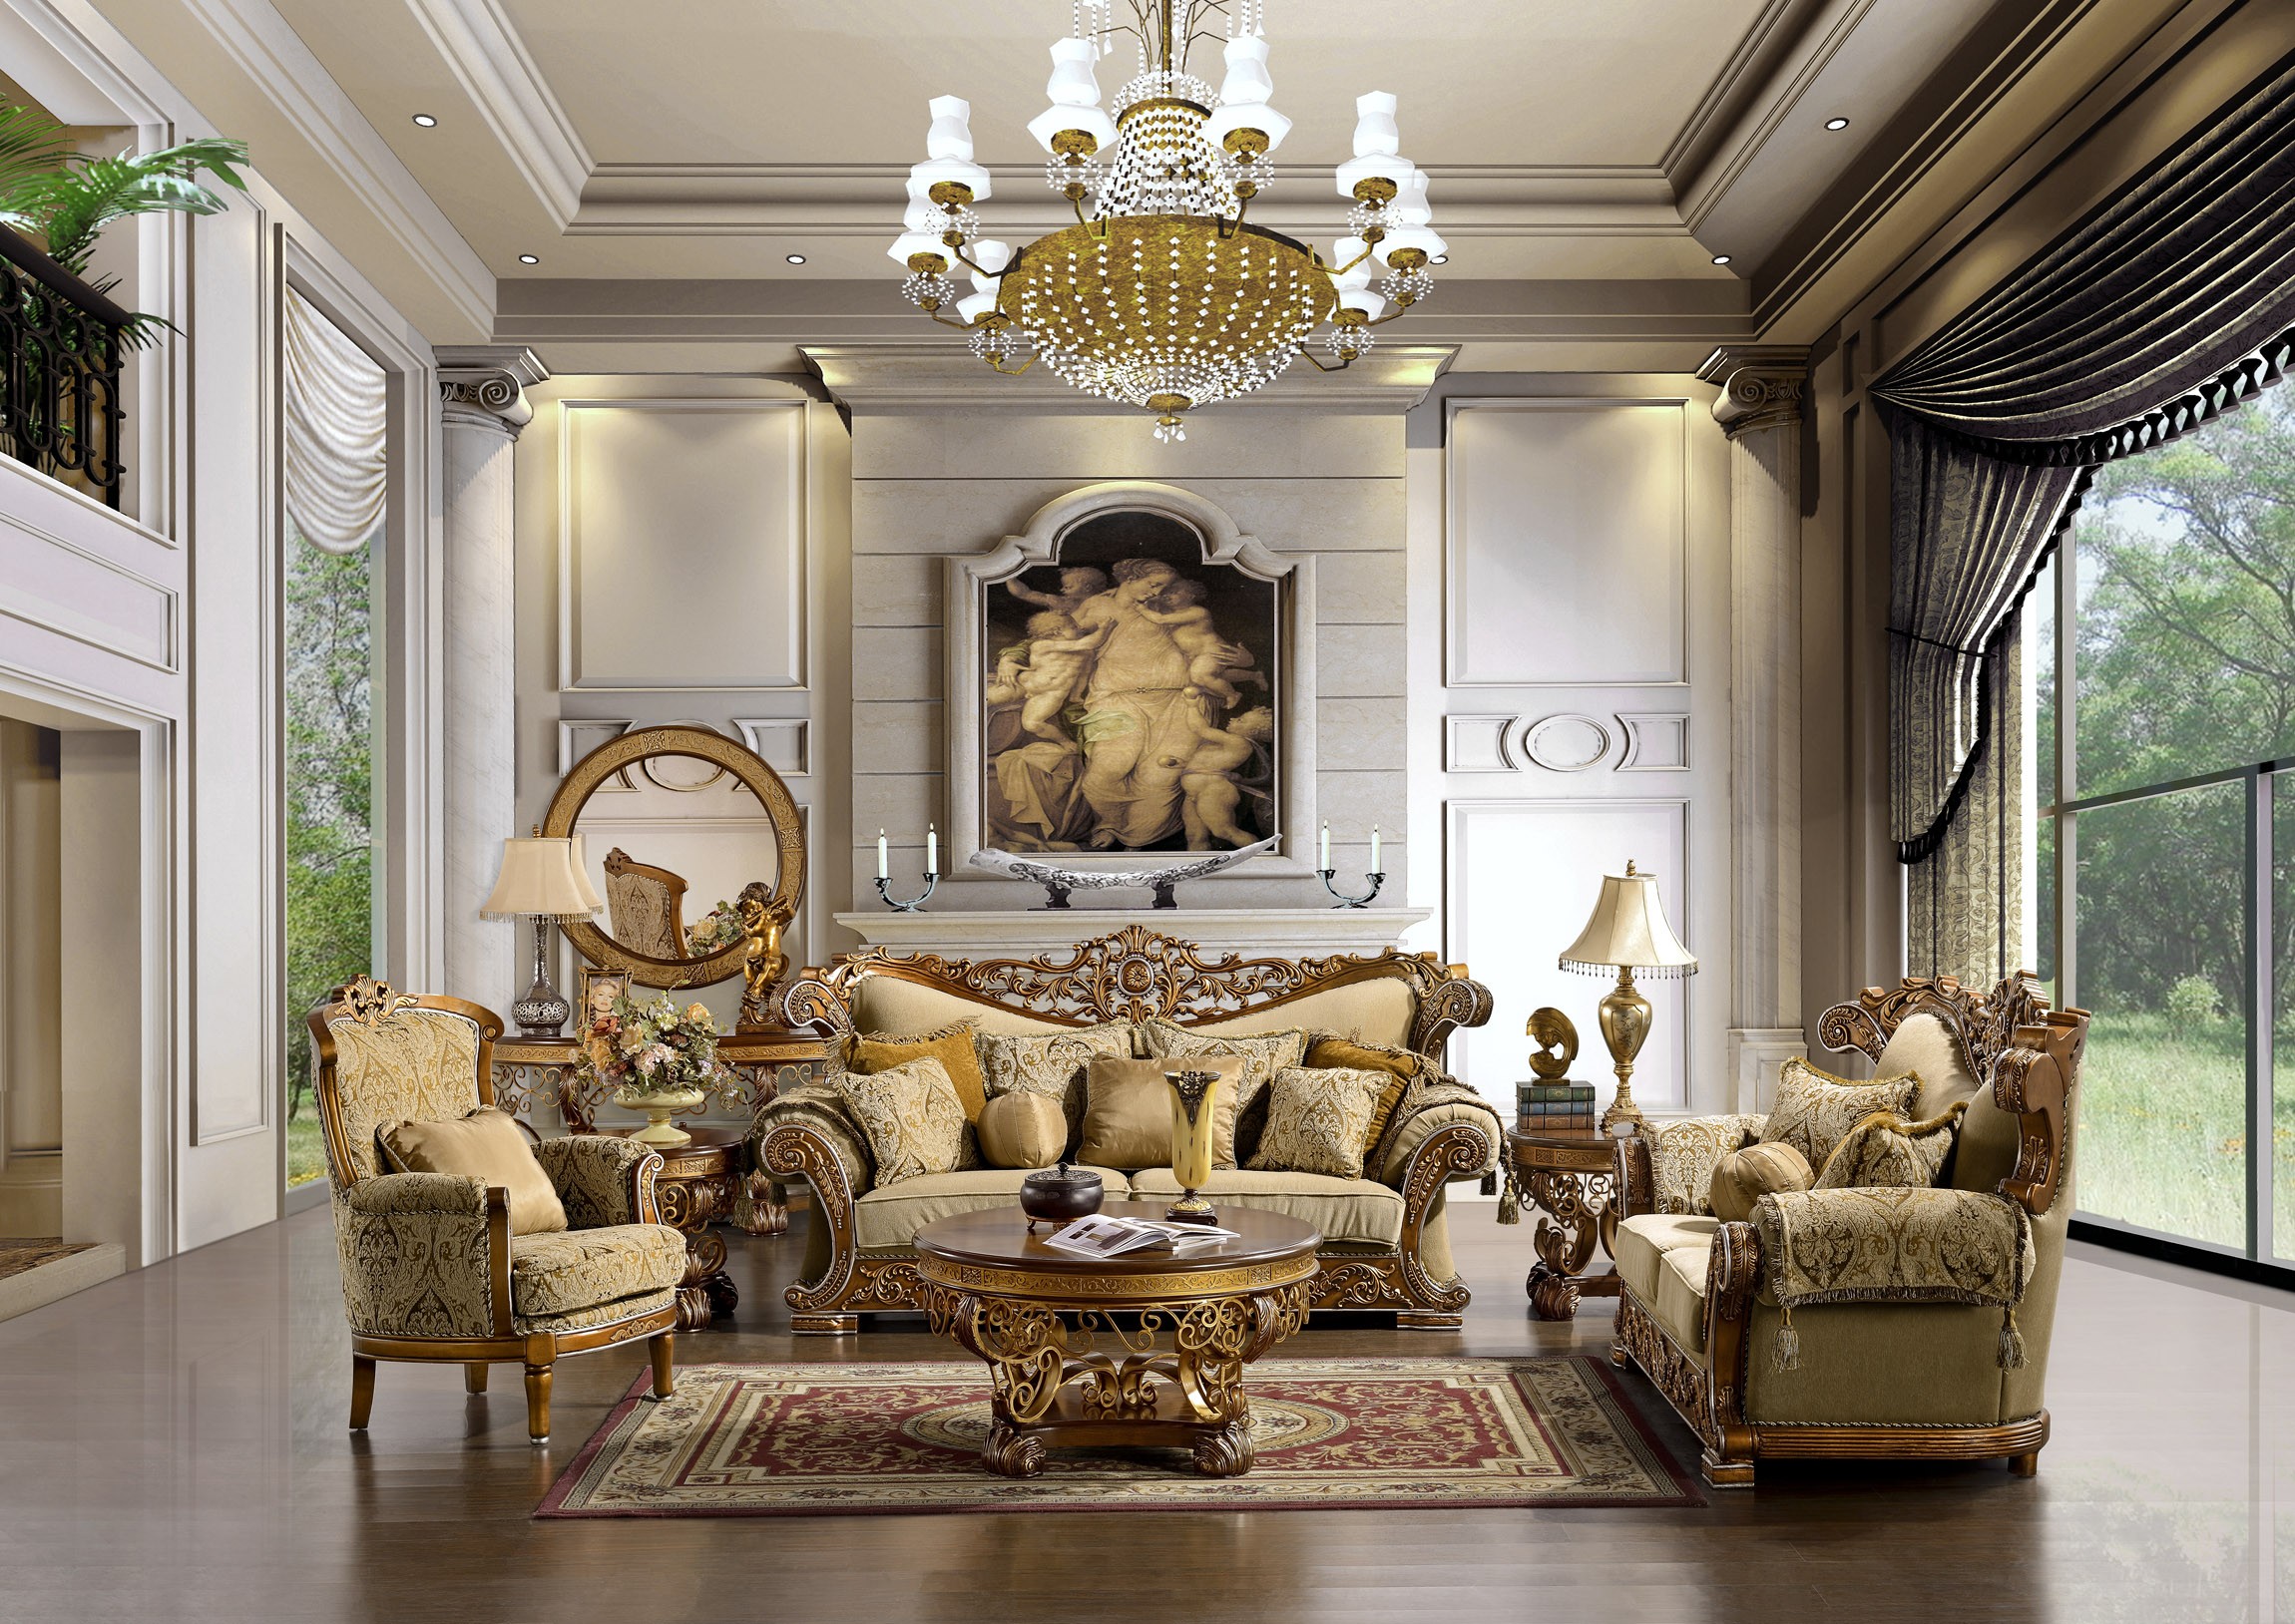 30 ideas to equip the formal living room